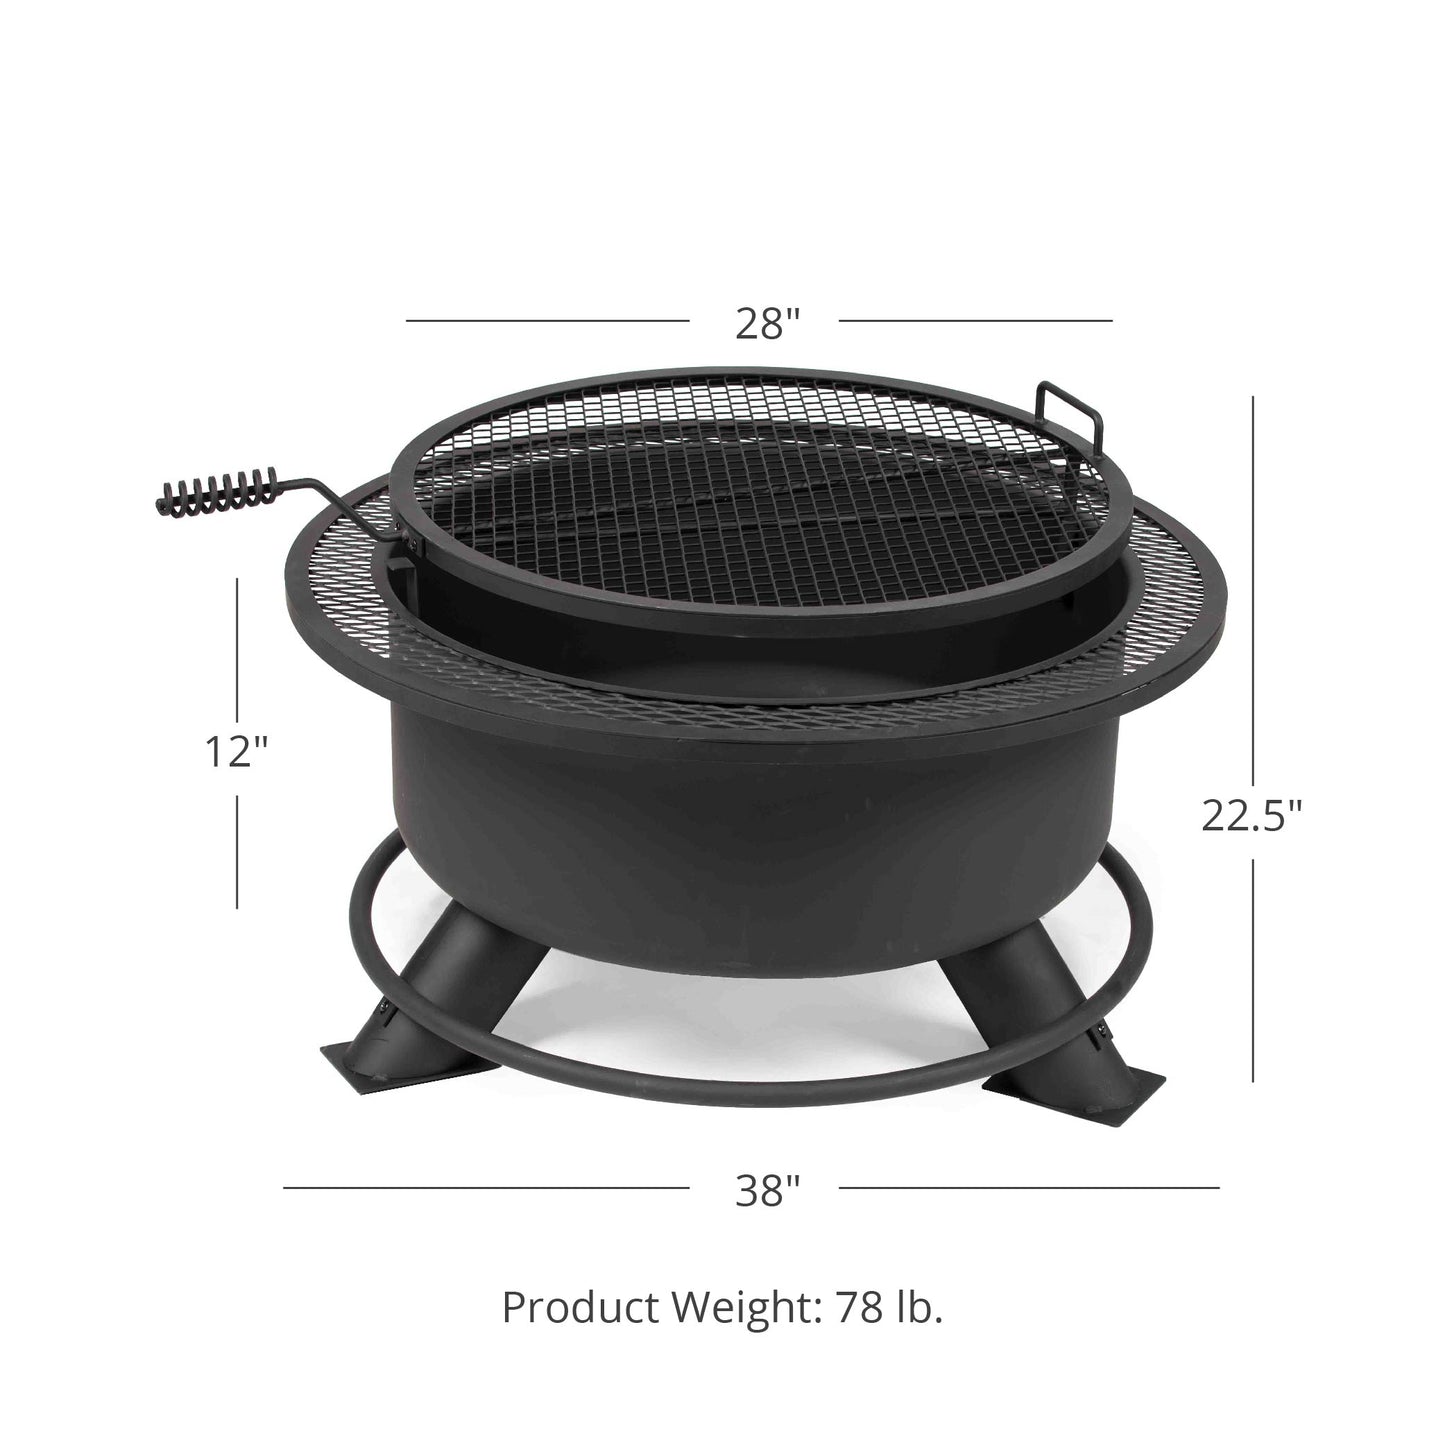 38" Fire Pit with Swivel Grate - view 11